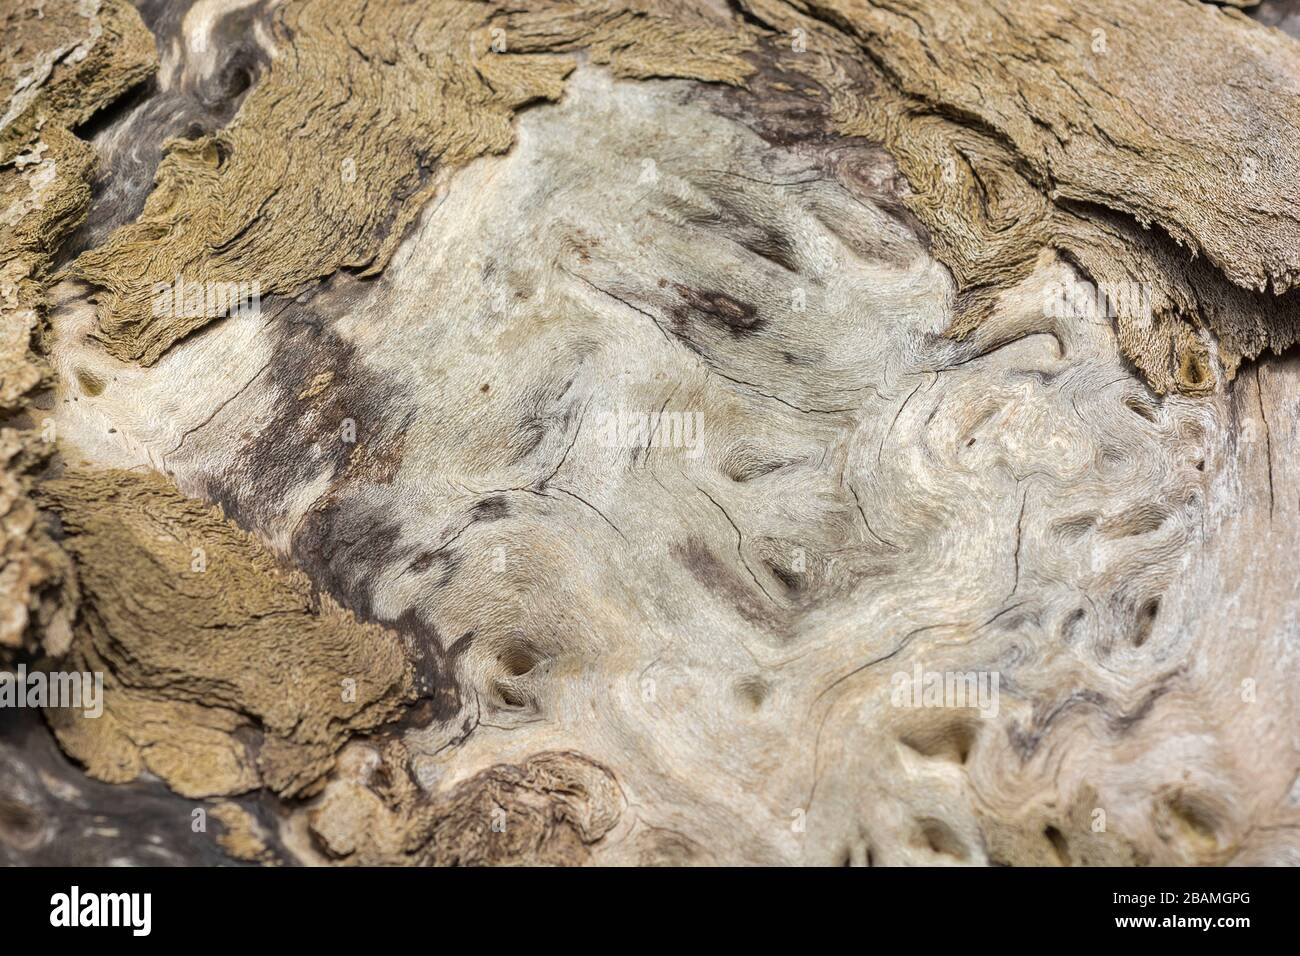 Exposed wood of old felled tree rotting away. Surface texture shows internal structure of the tree's physiology. Stock Photo